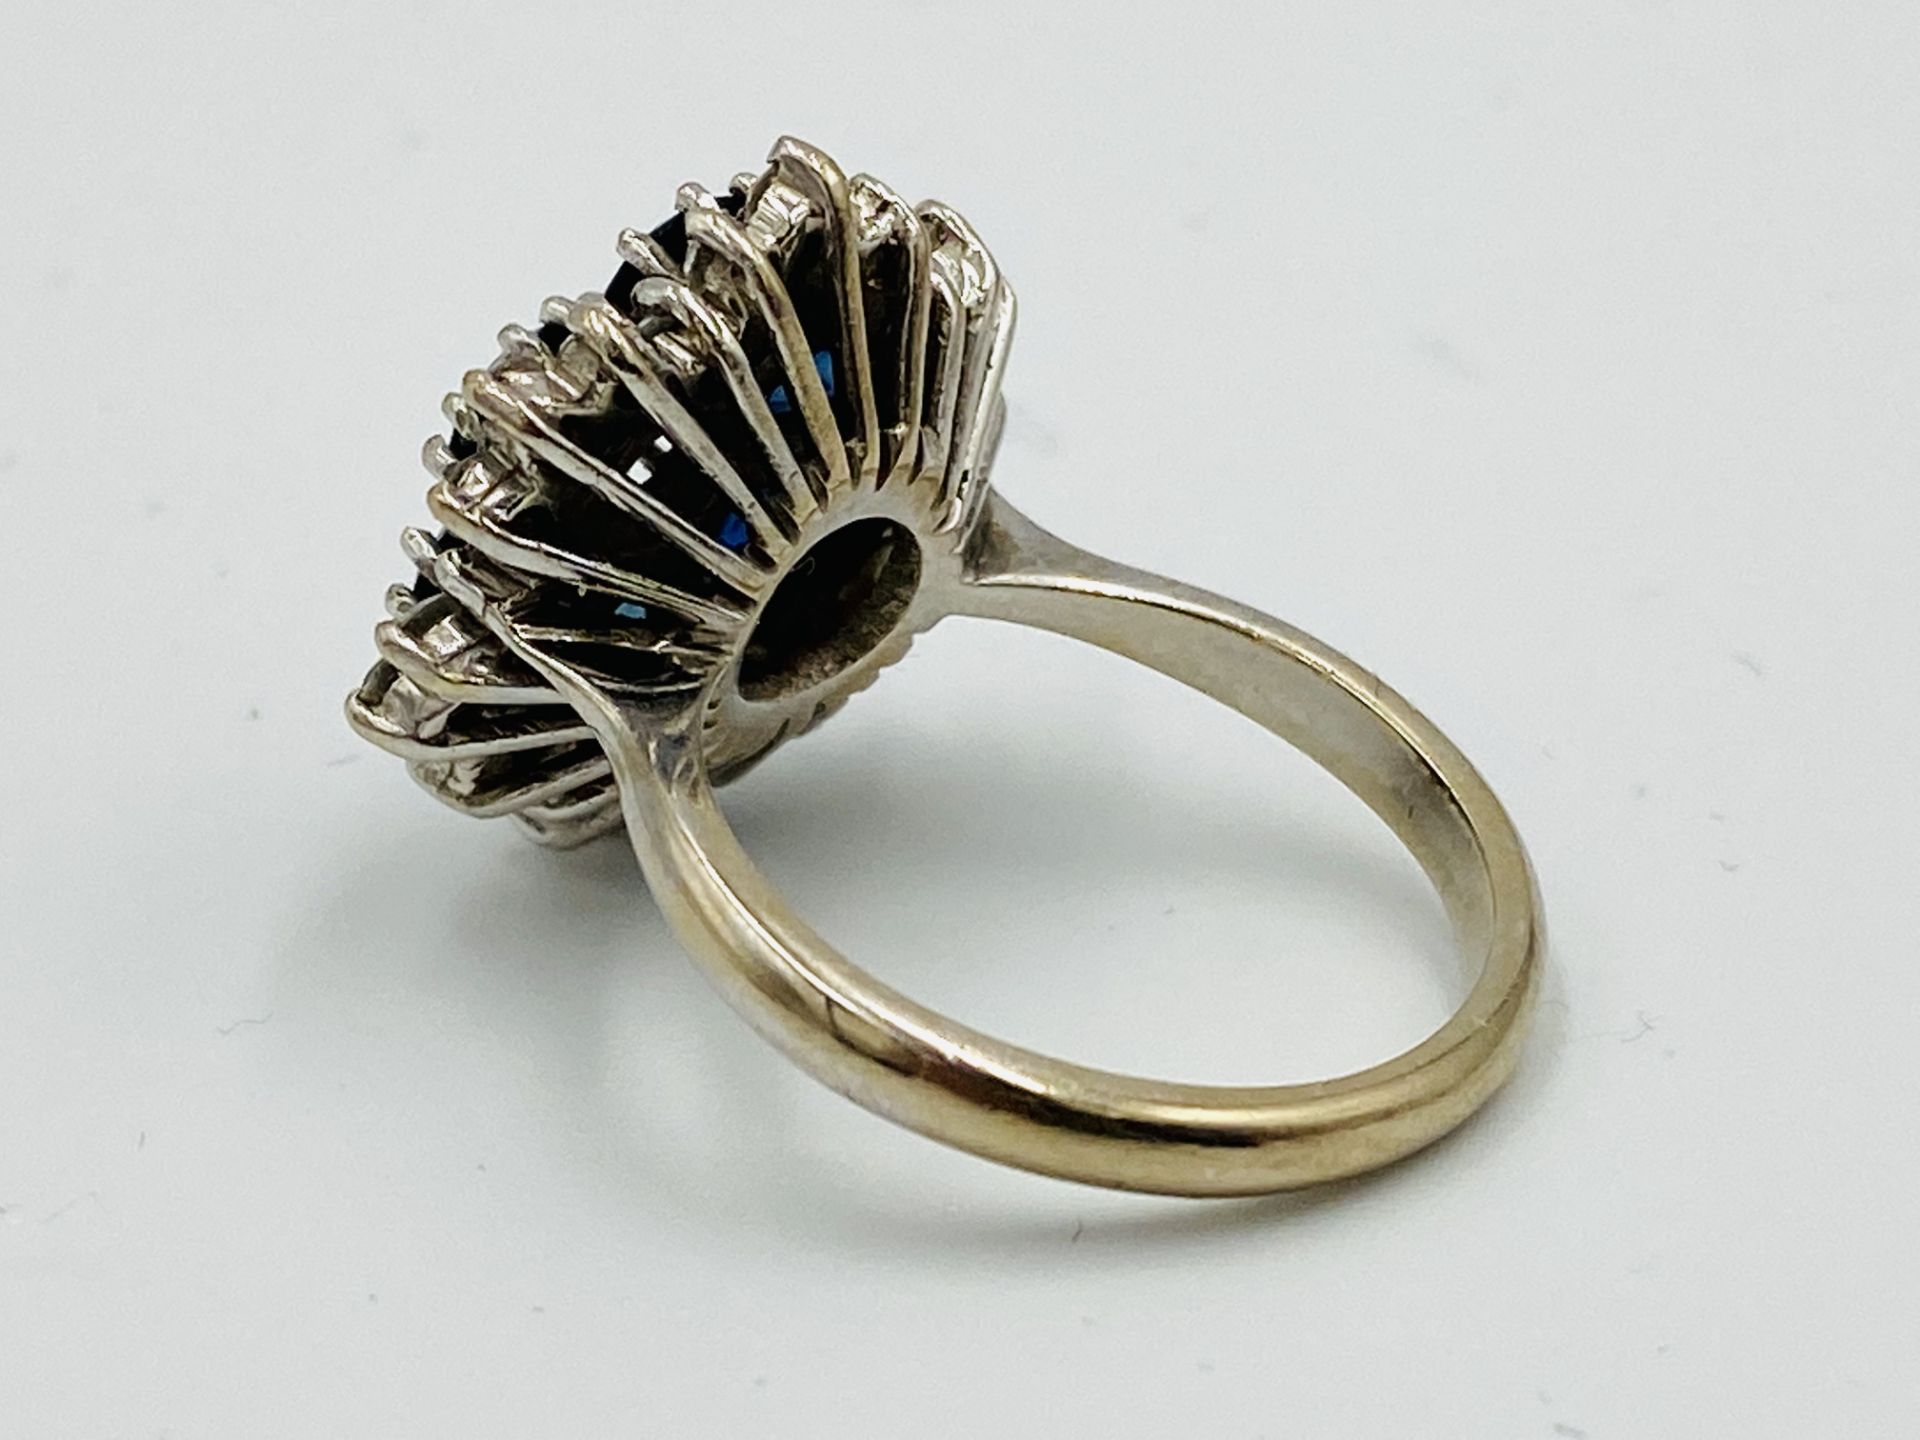 18ct gold, diamond and sapphire ring - Image 3 of 4